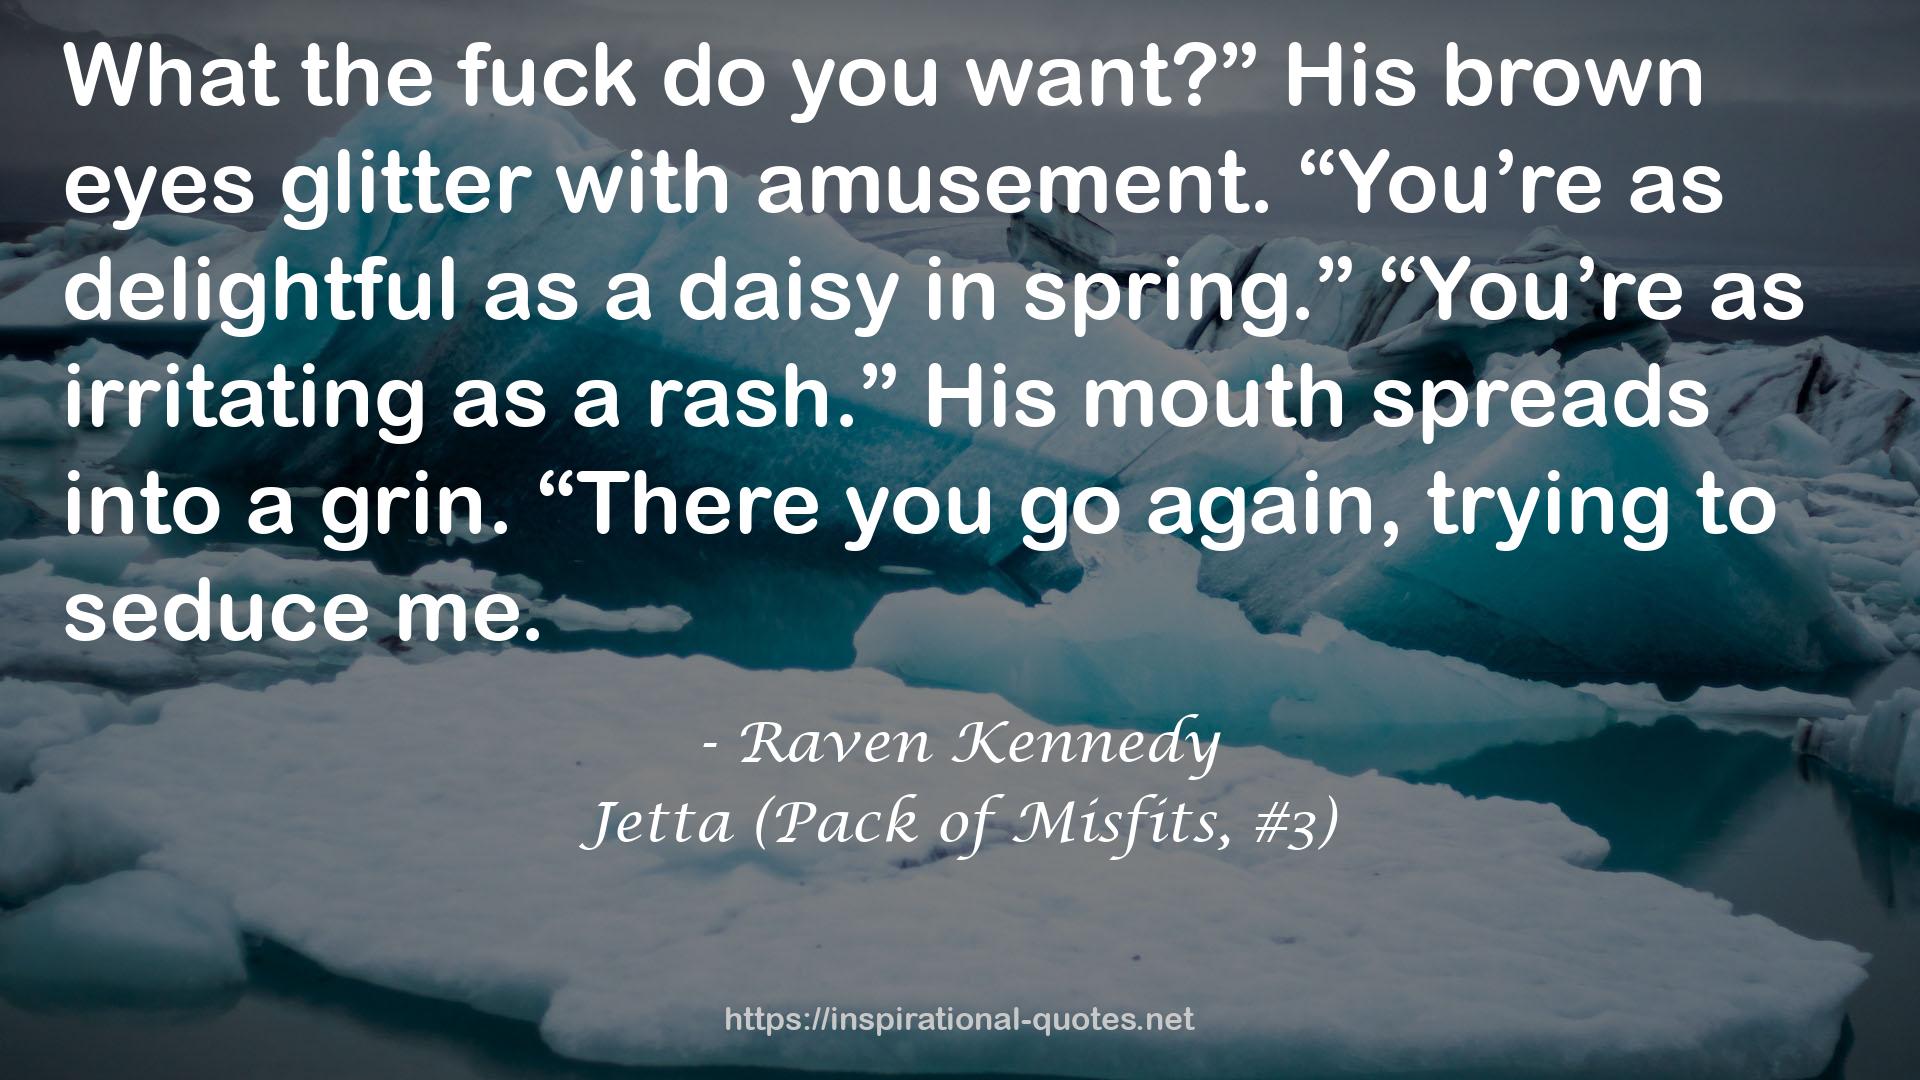 Jetta (Pack of Misfits, #3) QUOTES